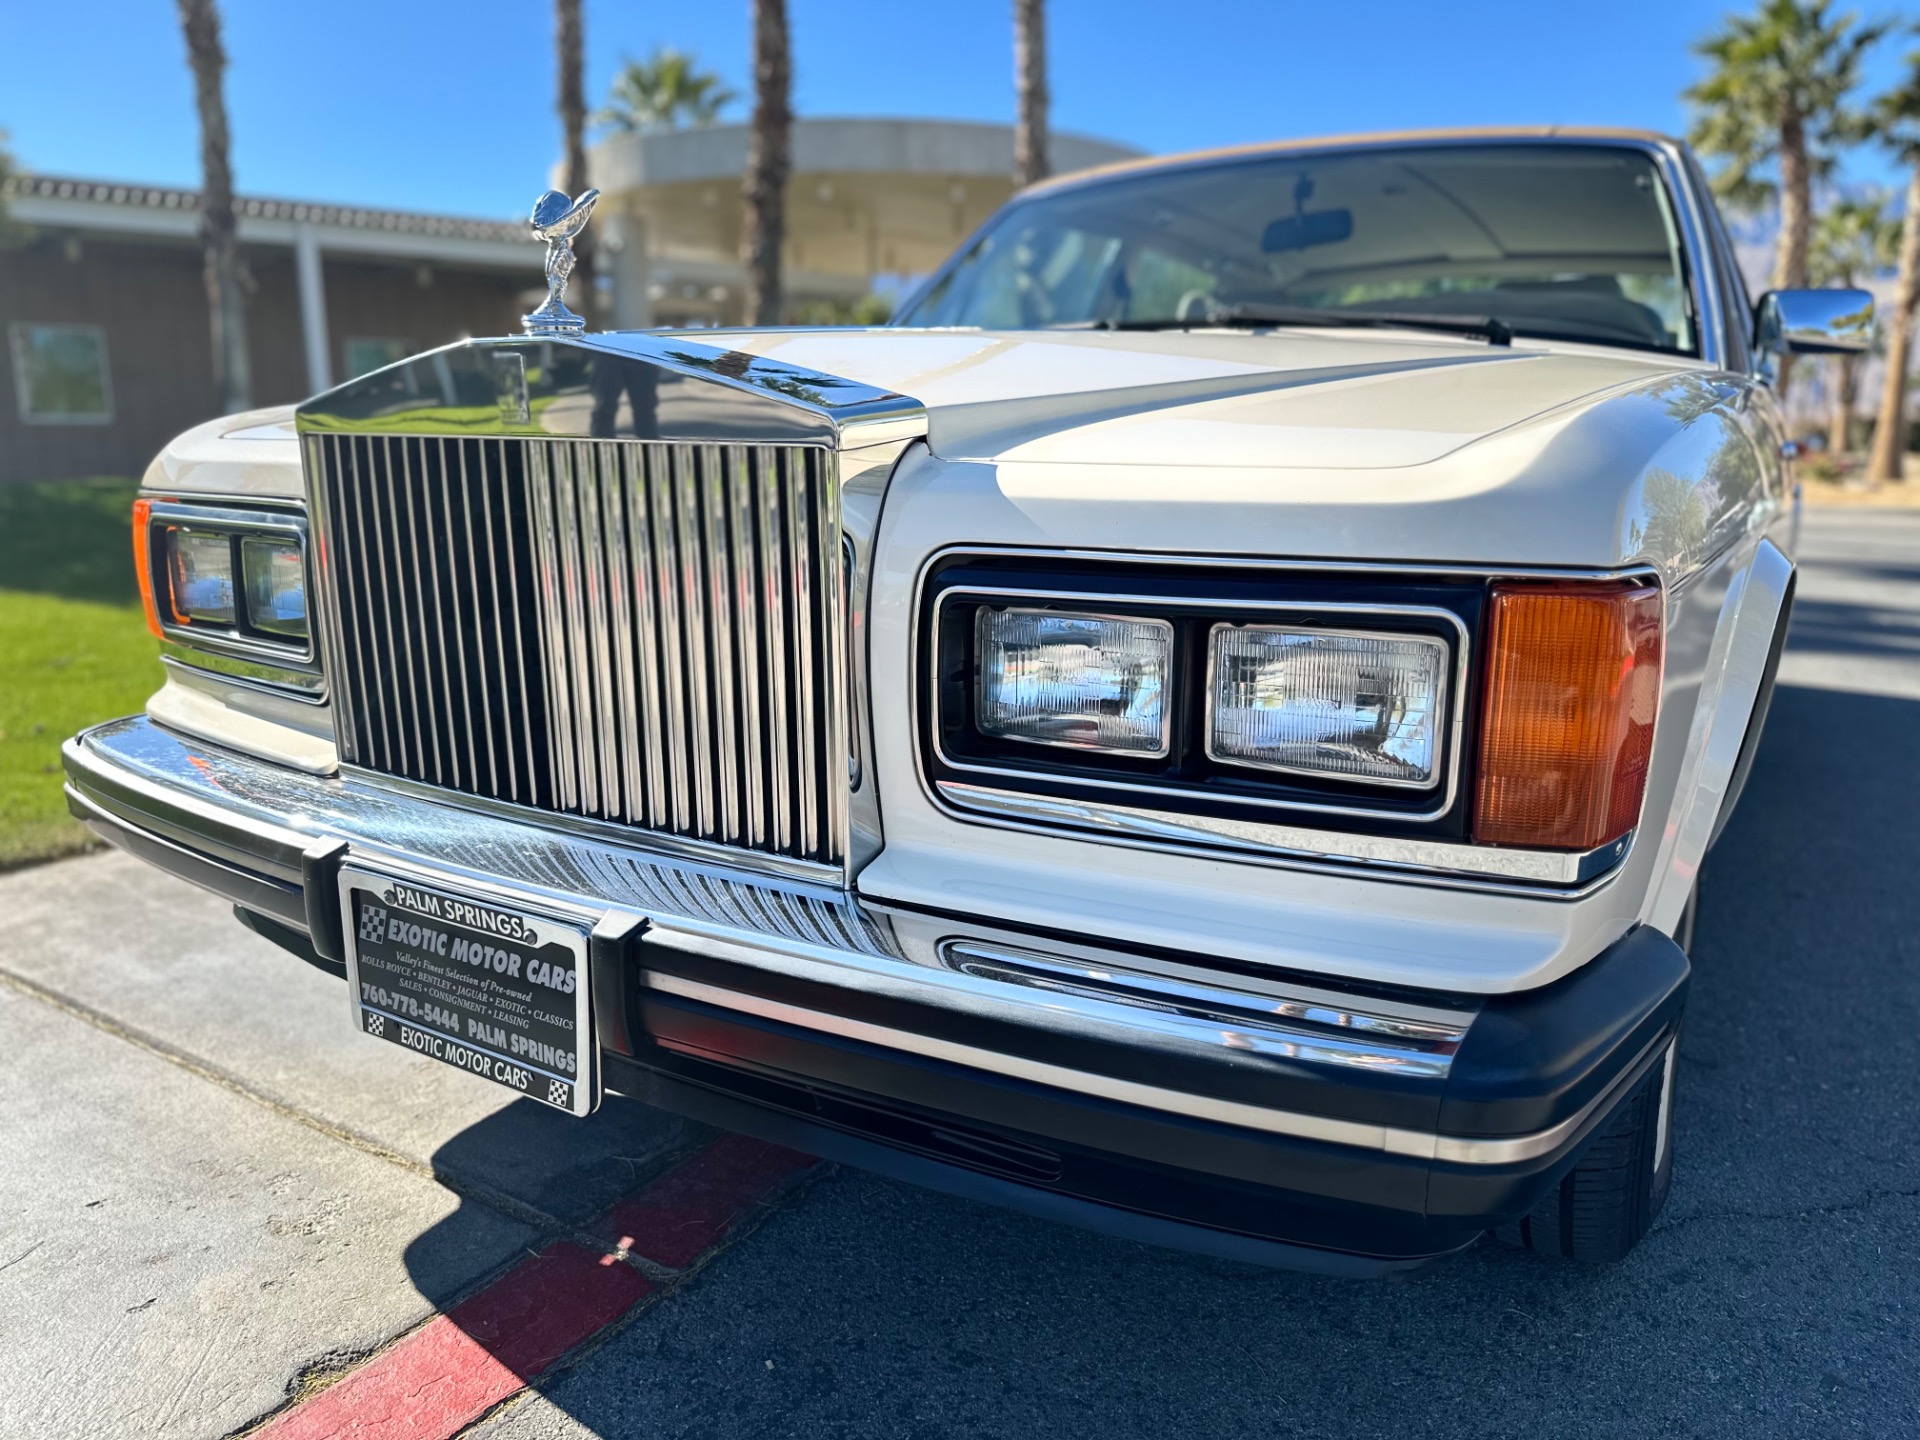 1988 Rolls Royce Silver Spur Stock # R476 for sale near Palm